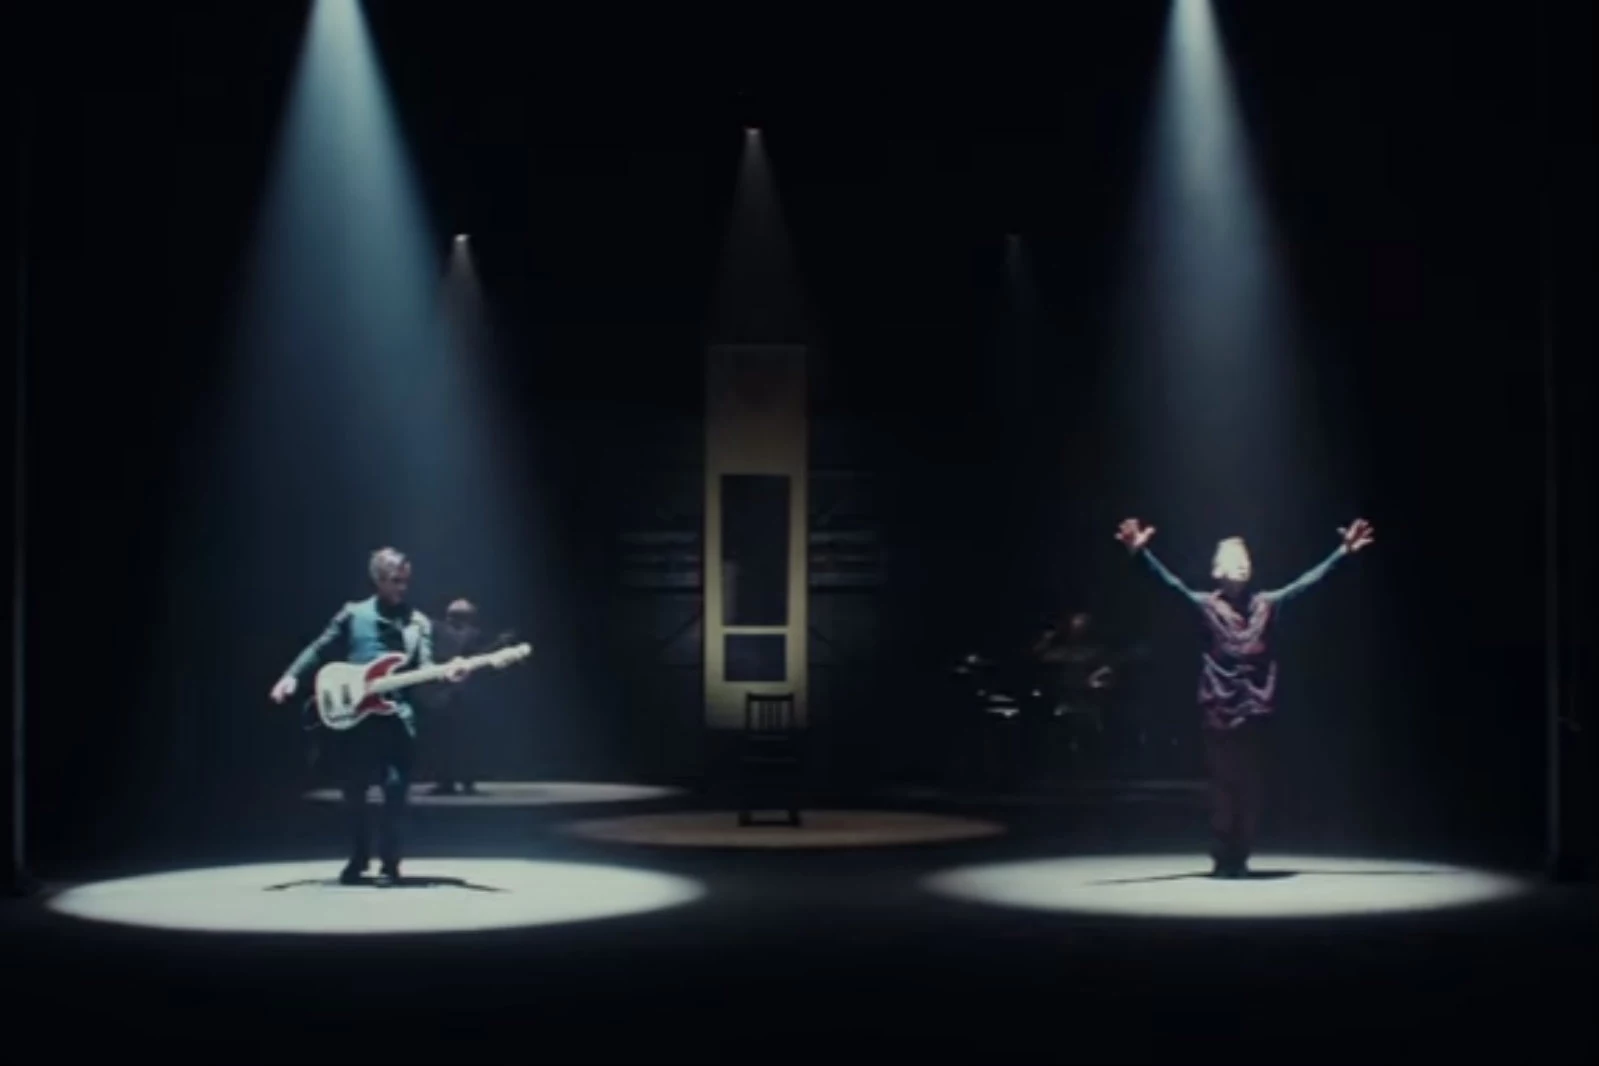 Shinedown's New Video “The Human Radio” Has Some Familiar Faces [VIDEO]